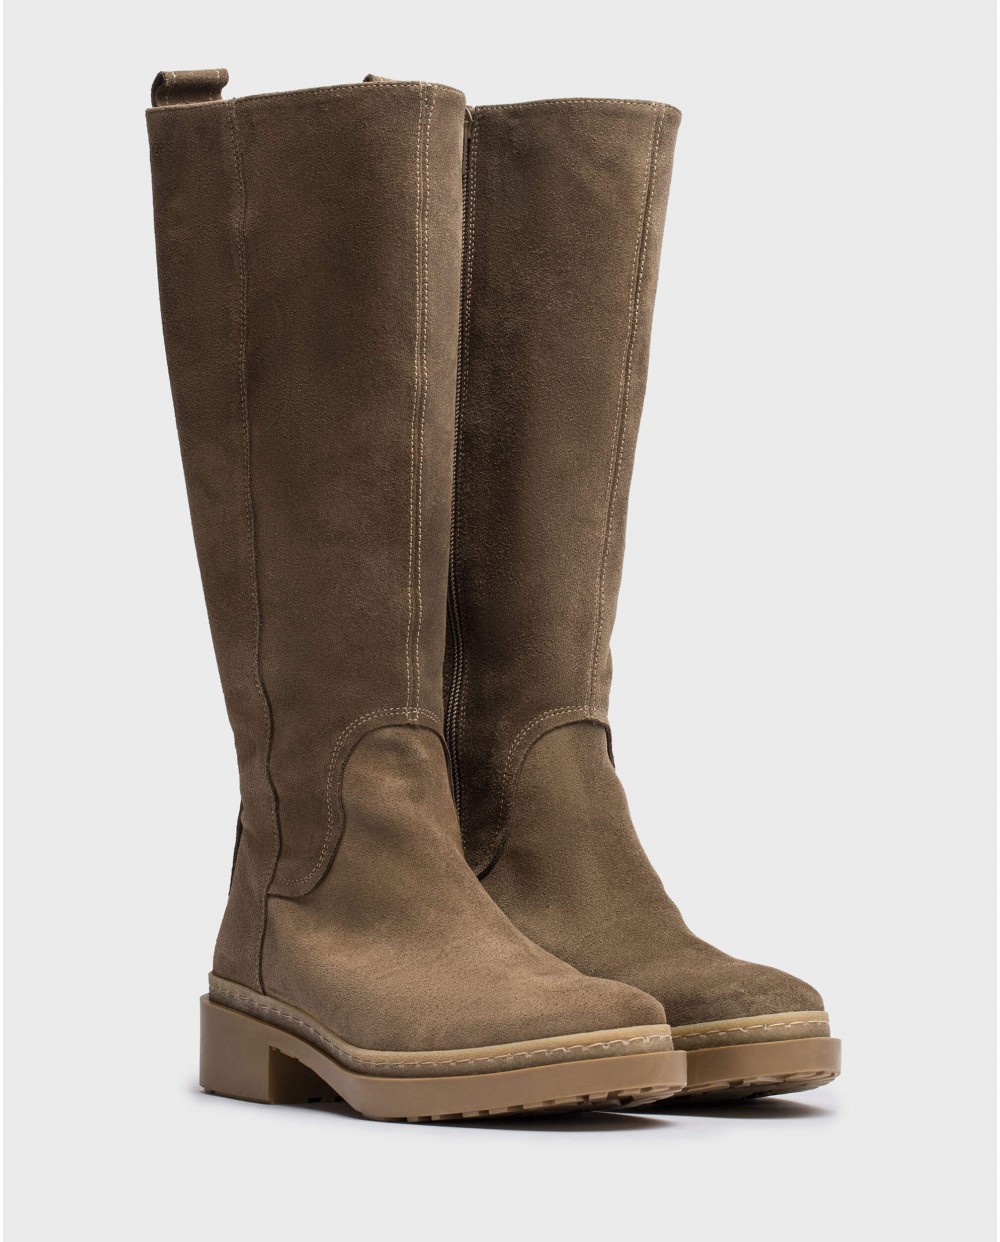 Wonders-Boots-Brown ROCO boot